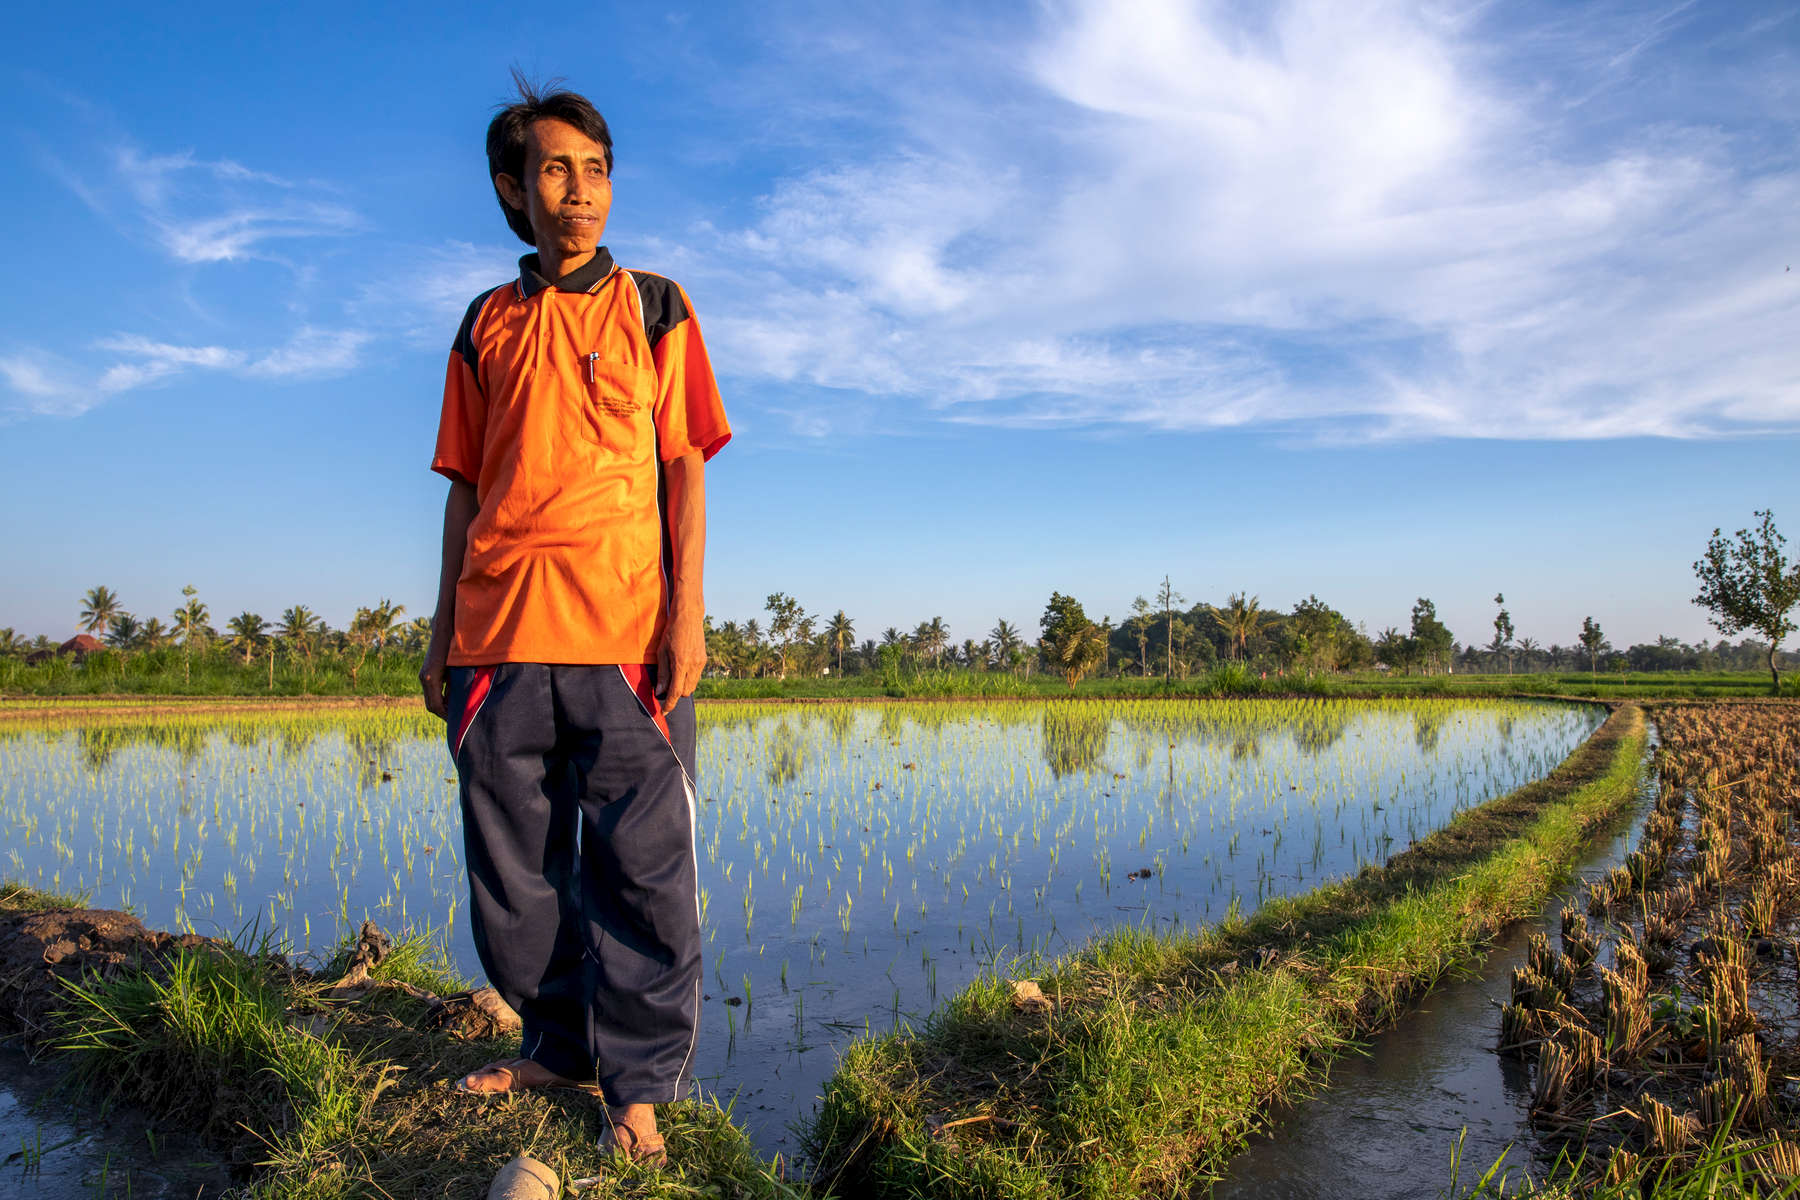 Pak Sahwil, 42,  stands in his fields. He is a rice farmer on Lombok in eastern Indonesia. Mercy Corps is helping him and the 60 other farmers in his farmers group learn how to grow stronger, heartier crops in the face of worsening drought.Lombok is extremely vulnerable to climate change, with shorter rainy seasons and longer dry seasons that put precious harvests at risk.A lifelong farmer on Lombok—and the son of rice farmers—Pak Sahwil can recall the dry seasons as far back as 15 years. As he gets older, he worries about longer droughts causing harvest failure. “Sometimes, climate change causes failure. What I feel the most is a long dry season,” he says.On Lombok, the dry season is now regularly starting a month earlier and lasting a month longer, leading to dangerous water shortages for farmers. “I’m very worried. Not just for next year, but even for this year. Accessing water is becoming difficult,” Pak Sahwil says.Mercy Corps has helped Pak Sahwil and the farmers group he mentors endure drought with better farming practices and business training. “Our objective as farmers is to increase our production. Because the Mercy Corps mission is the same as ours, we cooperate. This is a good opportunity, in my opinion,” he says.Mercy Corps trains farmers like Pak Sahwil to organize local farmers groups where farmers work together and support each other. They also learn to start agribusinesses to supplement their income.Pak Sahwil also works for the governmental agriculture agency. When he saw how Mercy Corps was improving local farmers, he extended the partnership to other districts. “Because Mercy Corps is successful with my group, I share the knowledge with the group in this village,” he says.